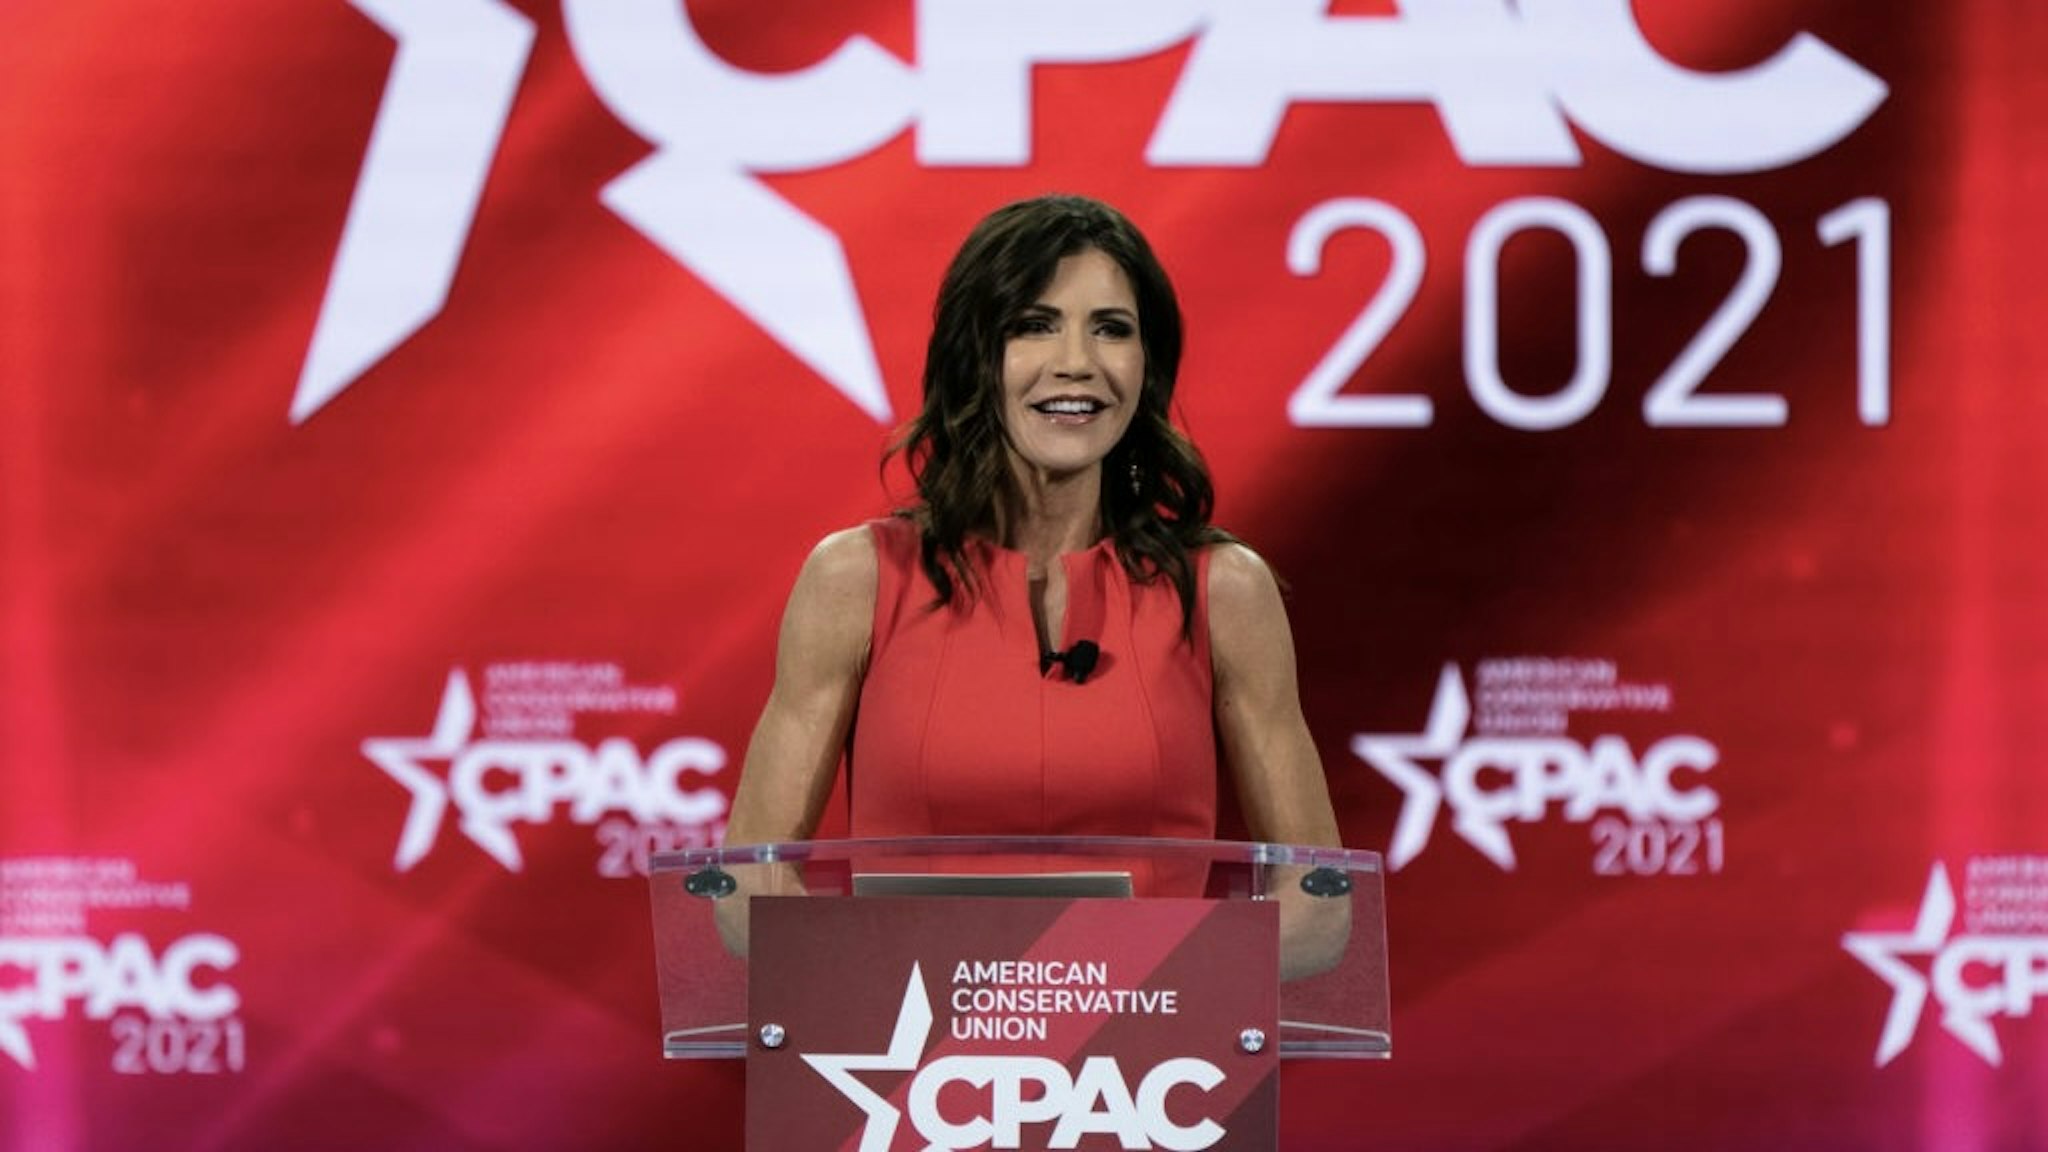 Kristi Noem, governor of South Dakota, speaks during the Conservative Political Action Conference (CPAC) in Orlando, Florida, U.S., on Saturday, Feb. 27, 2021. Donald Trump will speak at the annual Conservative Political Action Campaign conference in Florida, his first public appearance since leaving the White House, to an audience of mostly loyal followers. Photographer: Elijah Nouvelage/Bloomberg